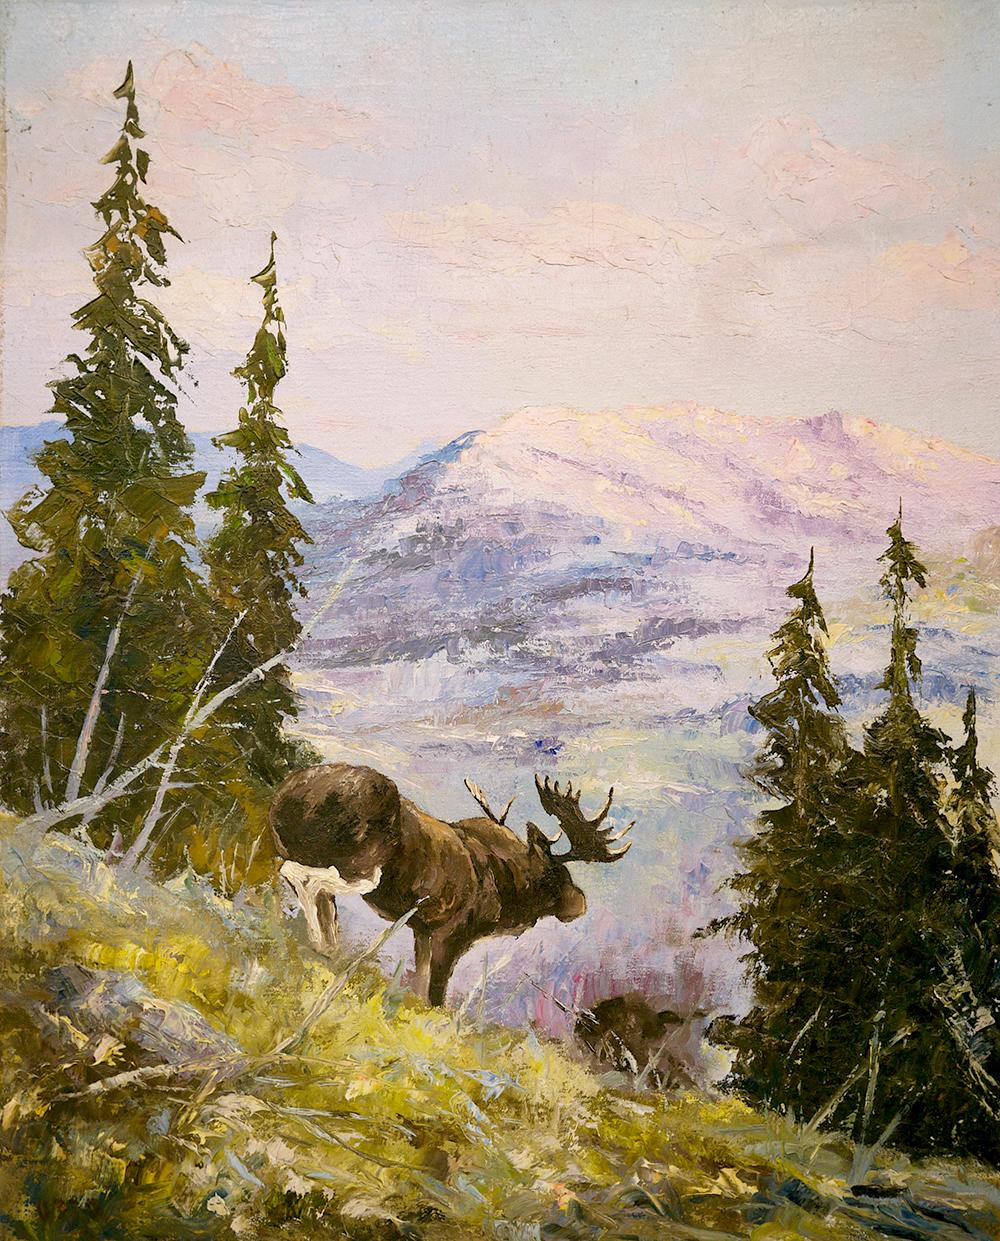 Rocvky Mountains landscape with Moose 

50 x 40 cm (dimensions referring to the painting only).
Oil painting on canvas.

Painting depicting a moose in the Rocky Mountains.

The painter captures a natural glimpse, among the mountain fir trees,